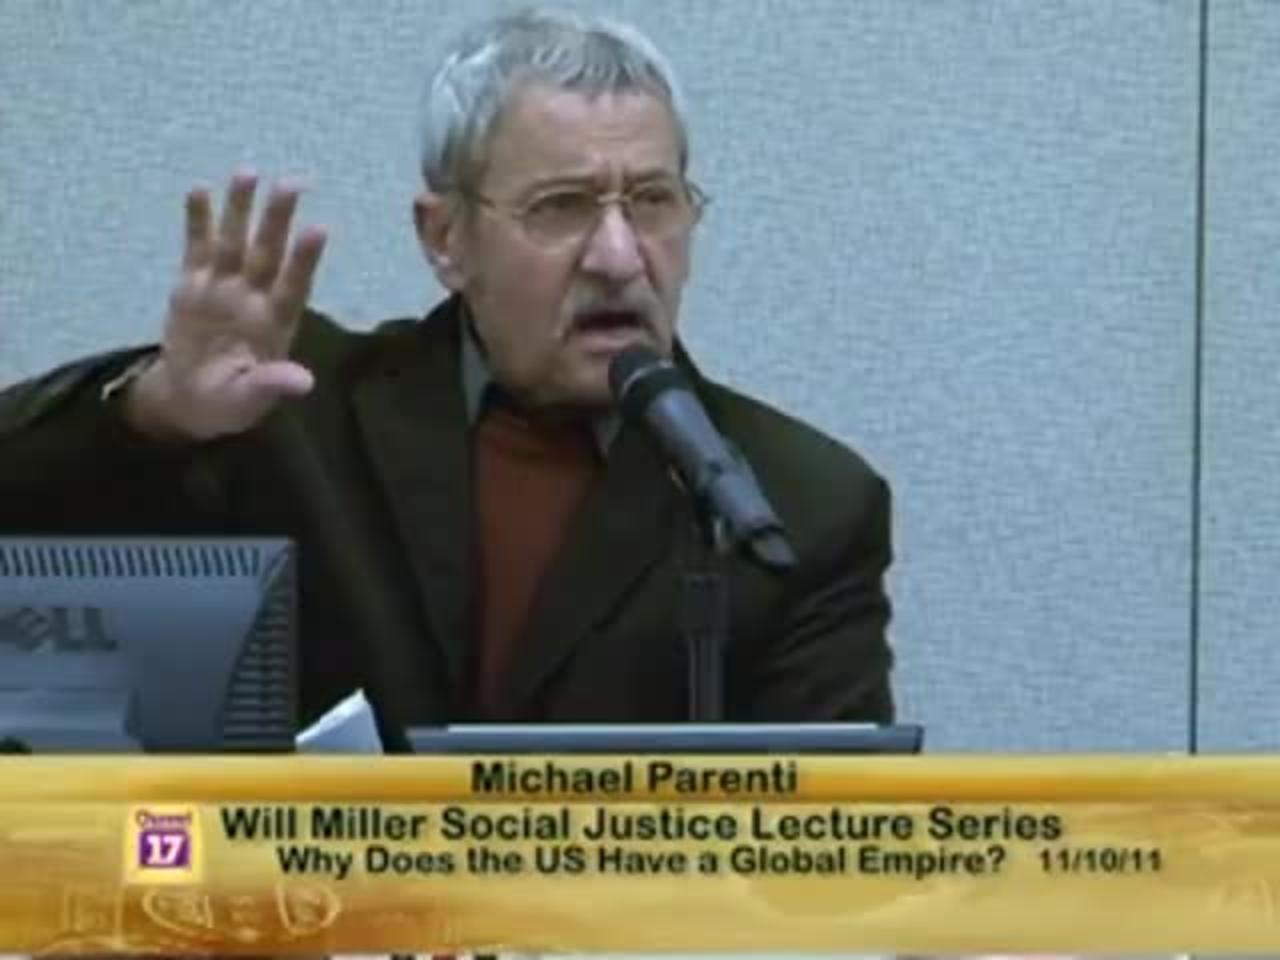 MICHAEL PARENTI: WHY DOES THE US HAVE A GLOBAL EMPIRE?